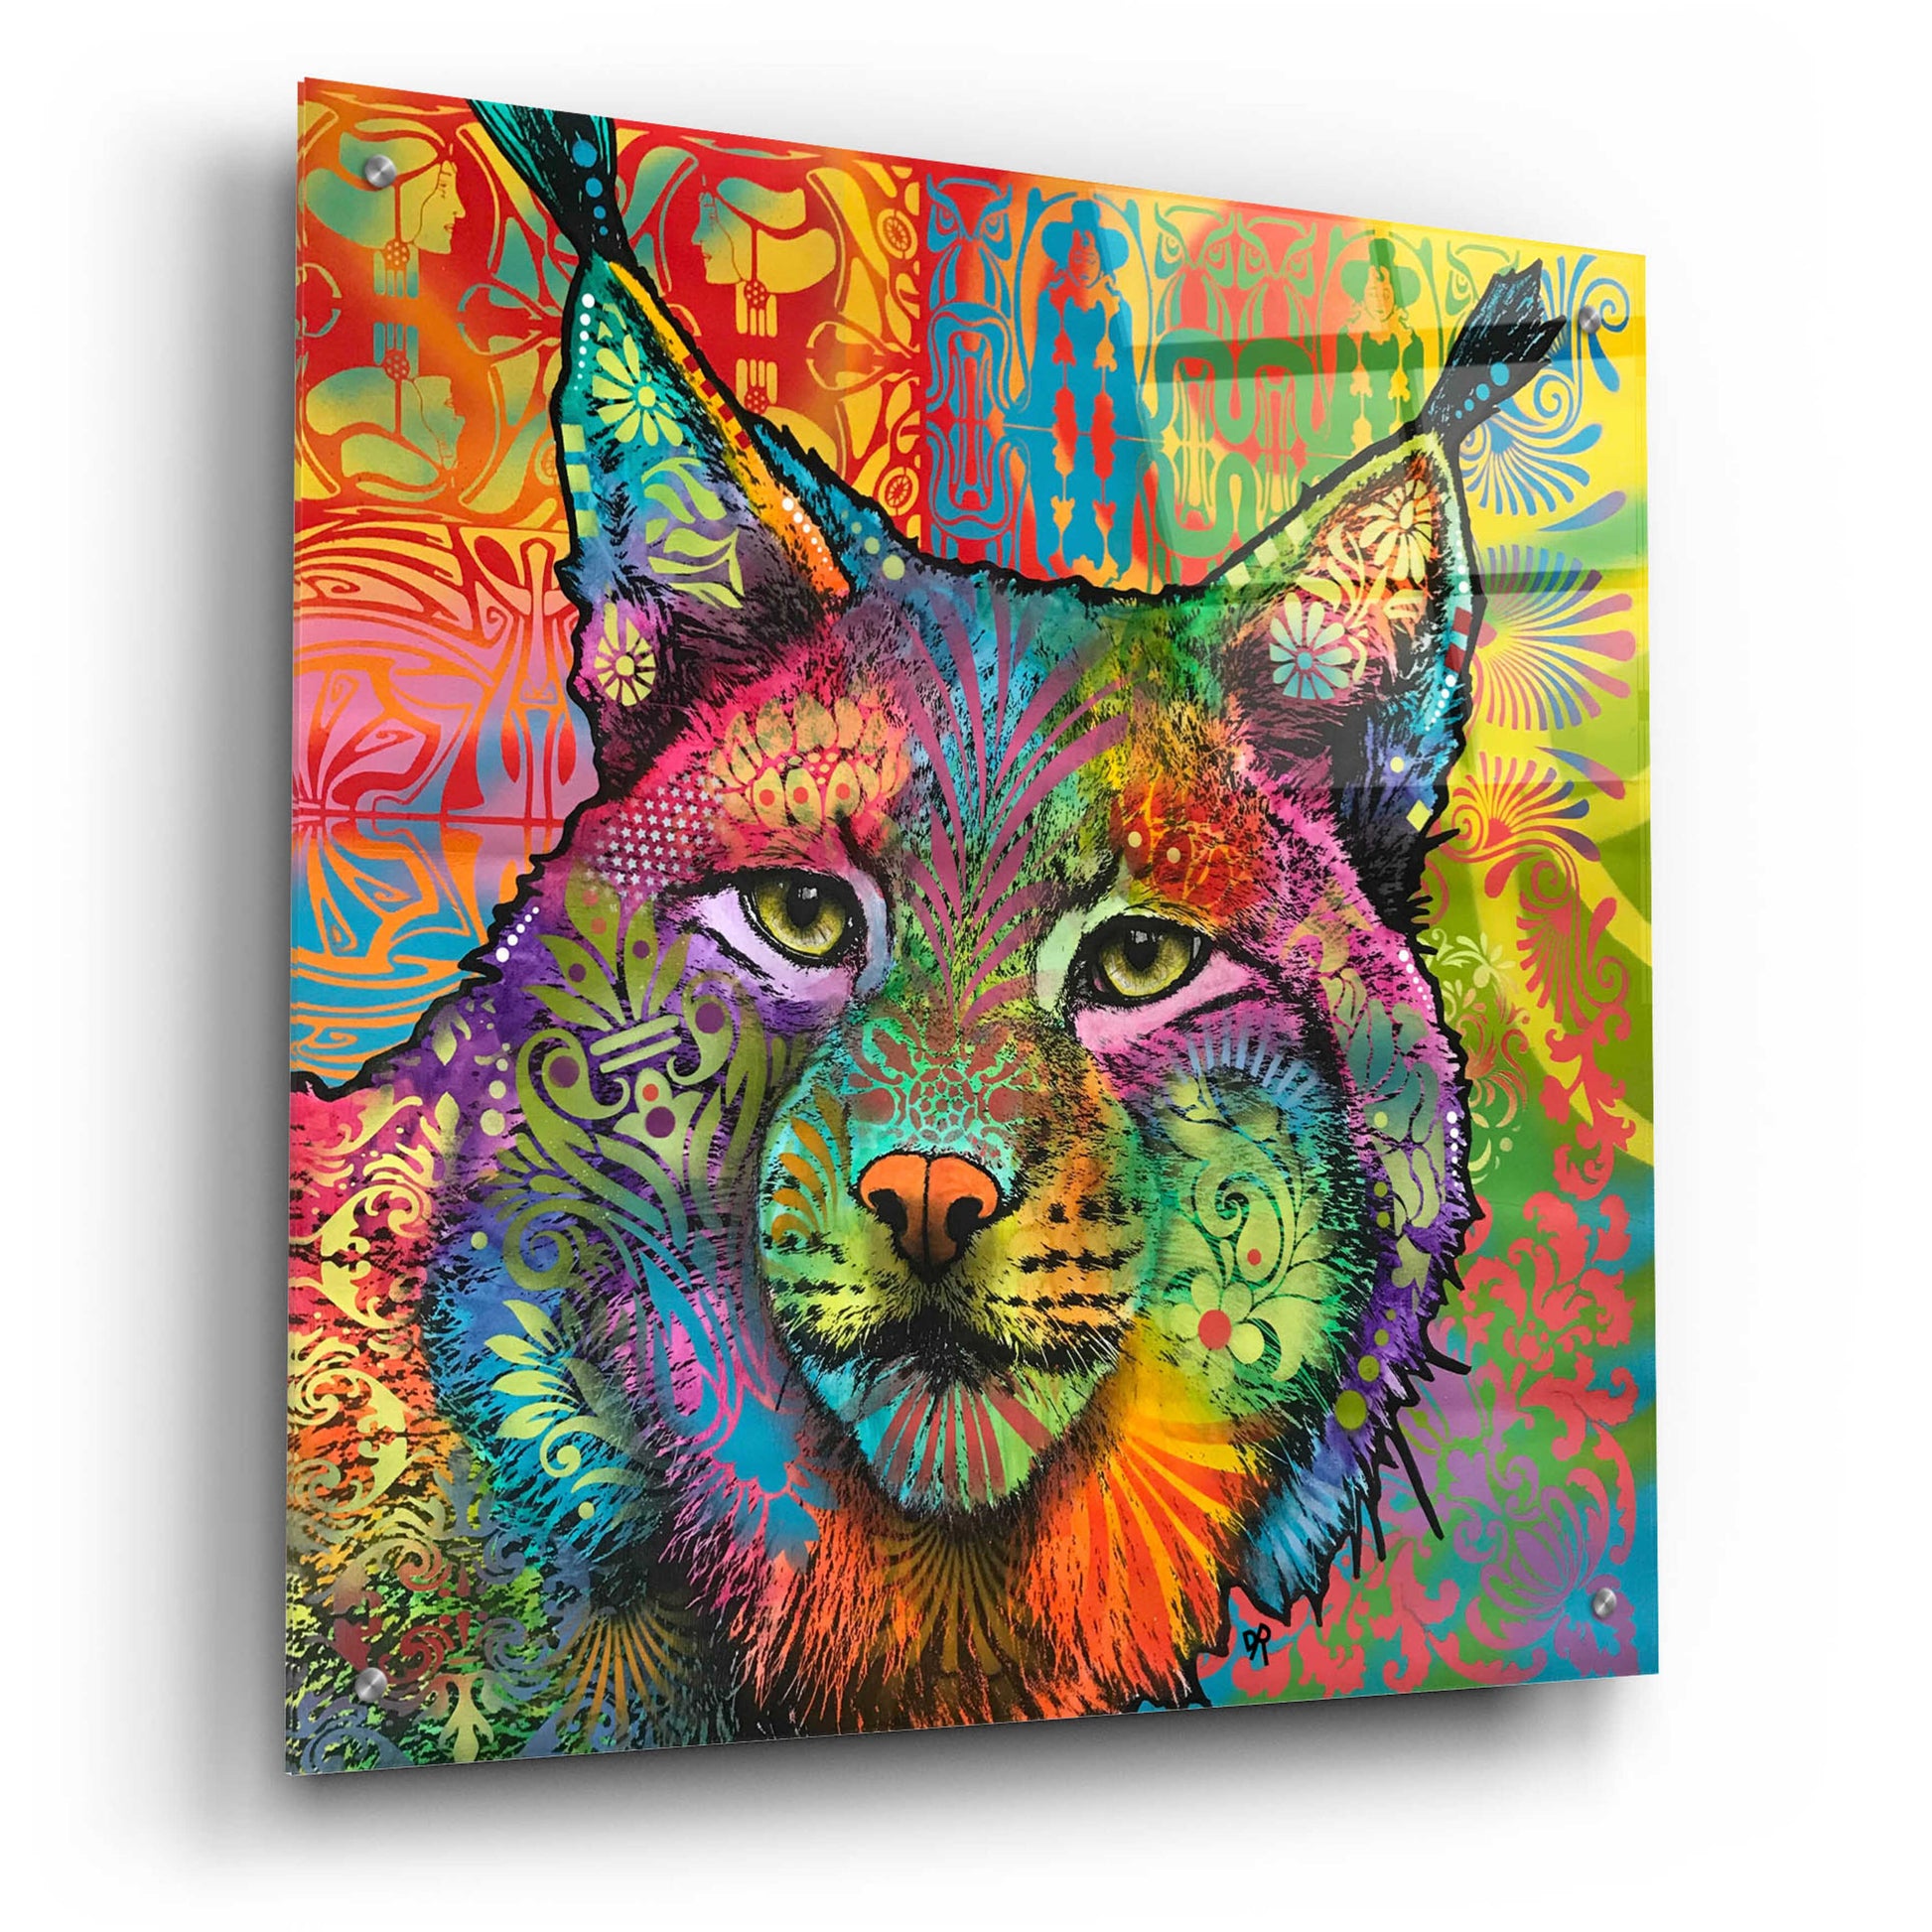 Epic Art 'The Lynx' by Dean Russo, Acrylic Glass Wall Art,24x24